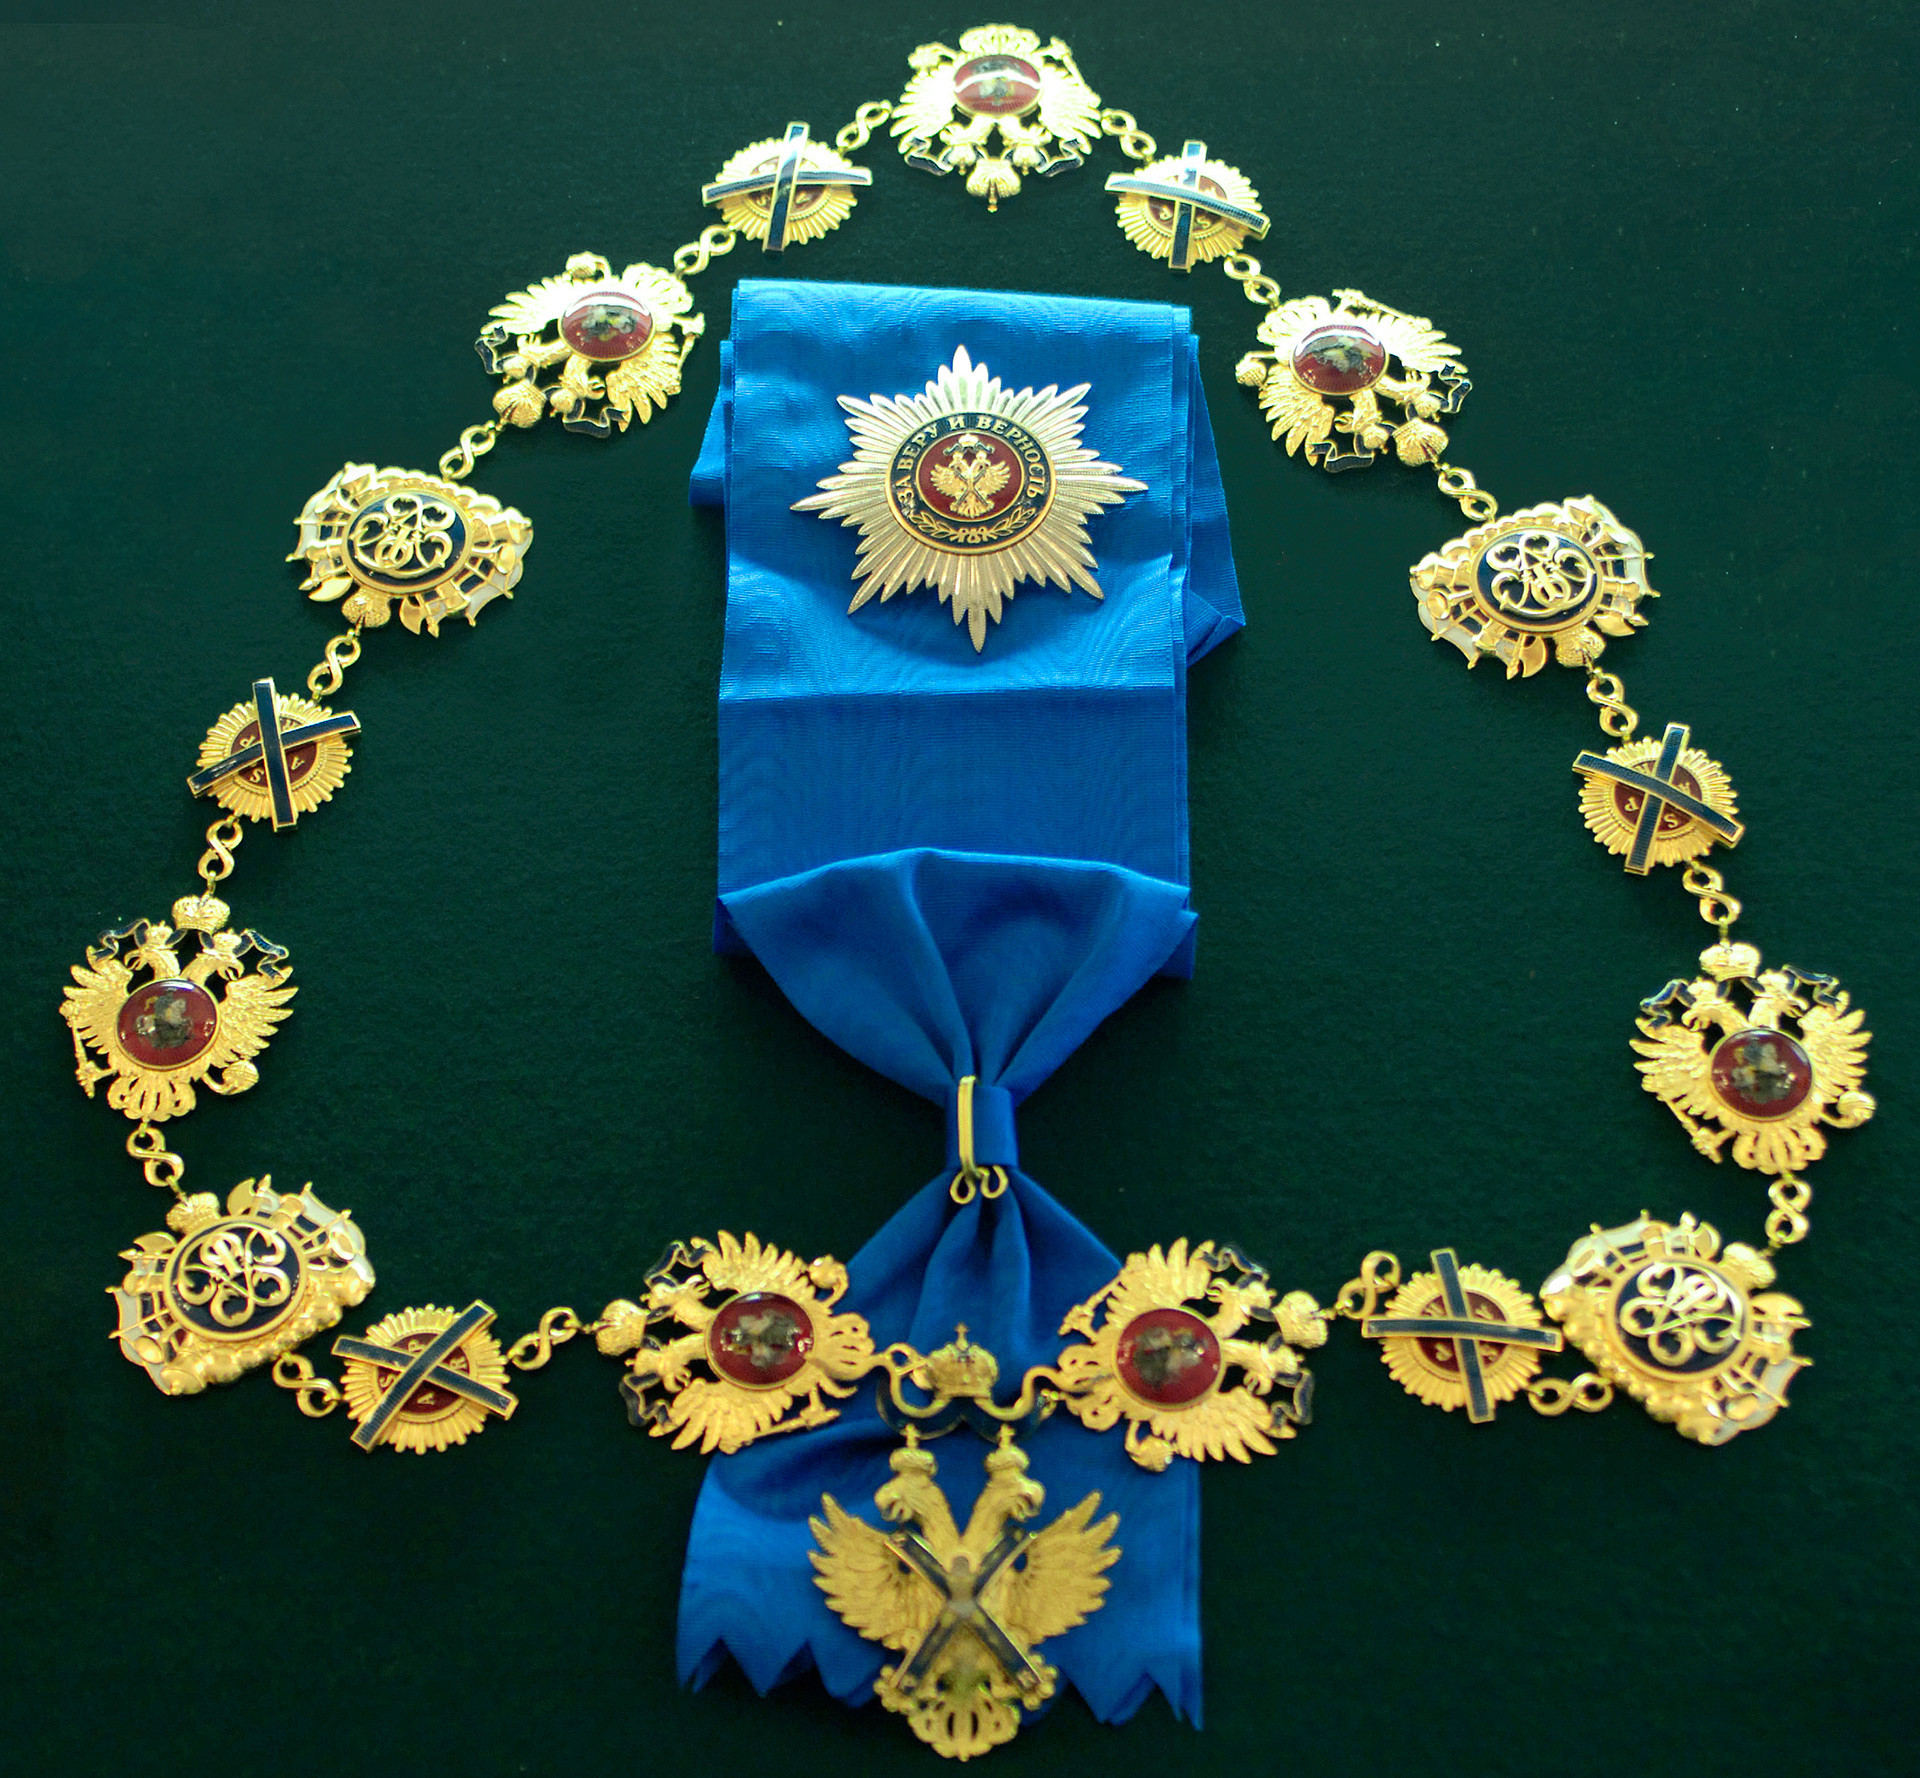 The Order of St. Andrew the Apostle the First-Called, the highest state decoration in Russia